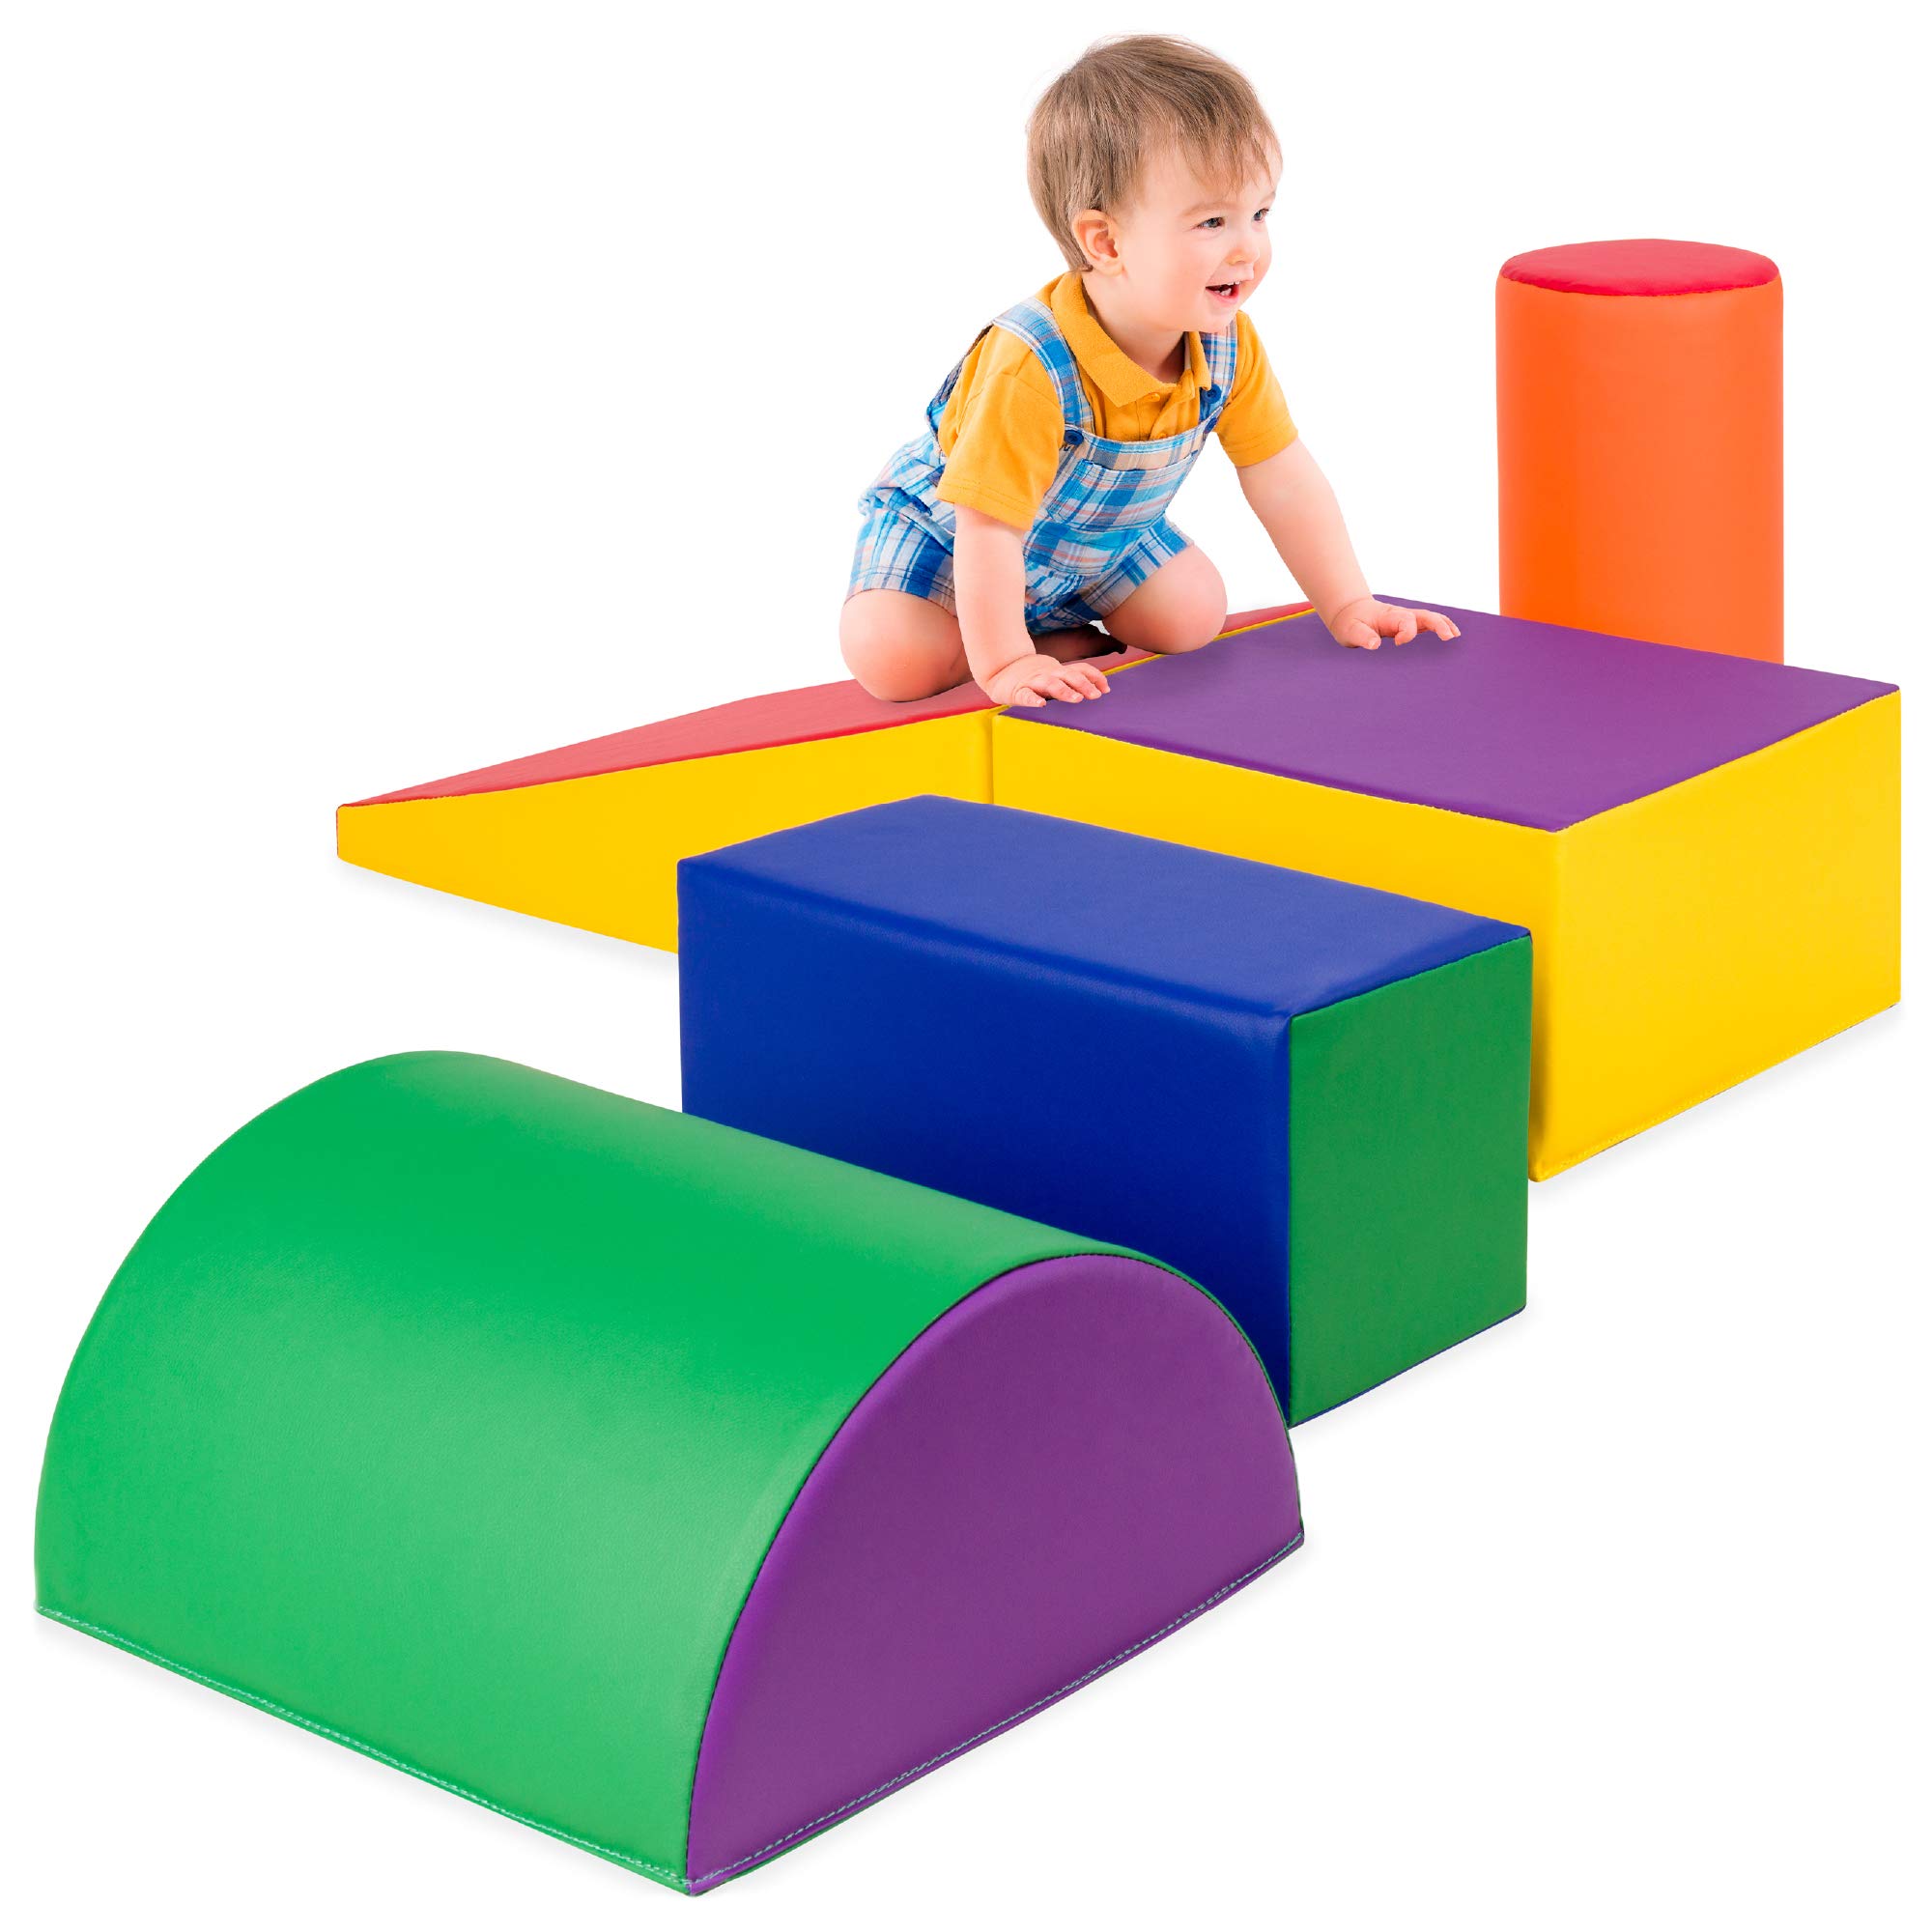 Best Choice Products 5-Piece Kids Climb & Crawl Soft Foam Block Activity Play Structures for Child Development, Color Coordination, Motor Skills - Multicolor